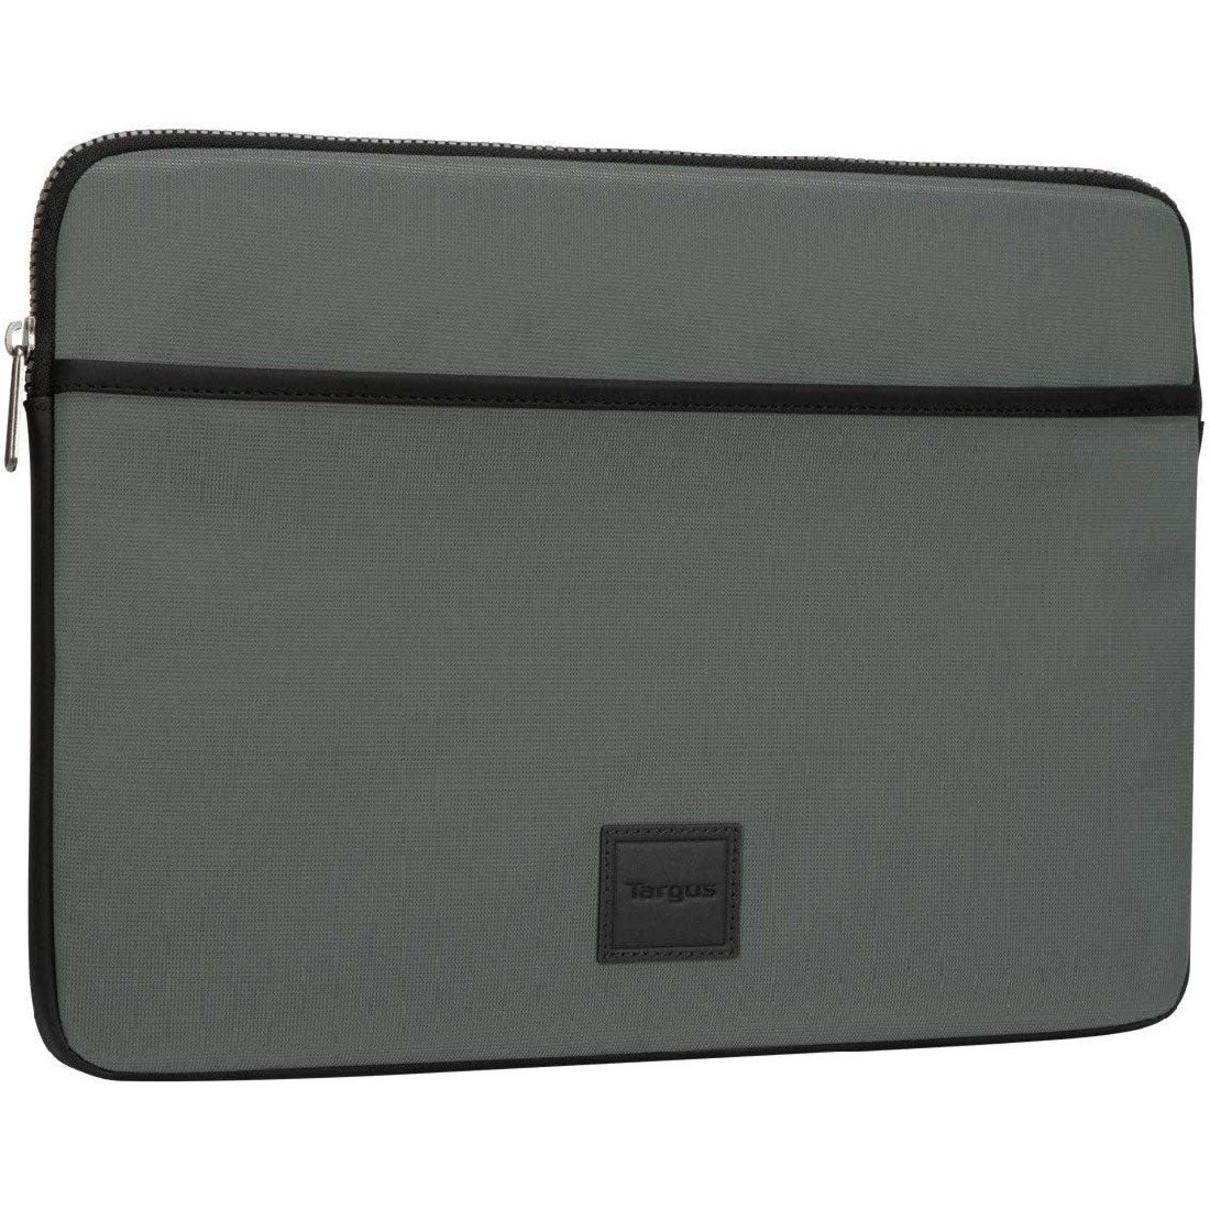 Targus Urban TBS93405GL Carrying Case (Sleeve) for 13″ to 14″ NotebookOlive TBS93405GL